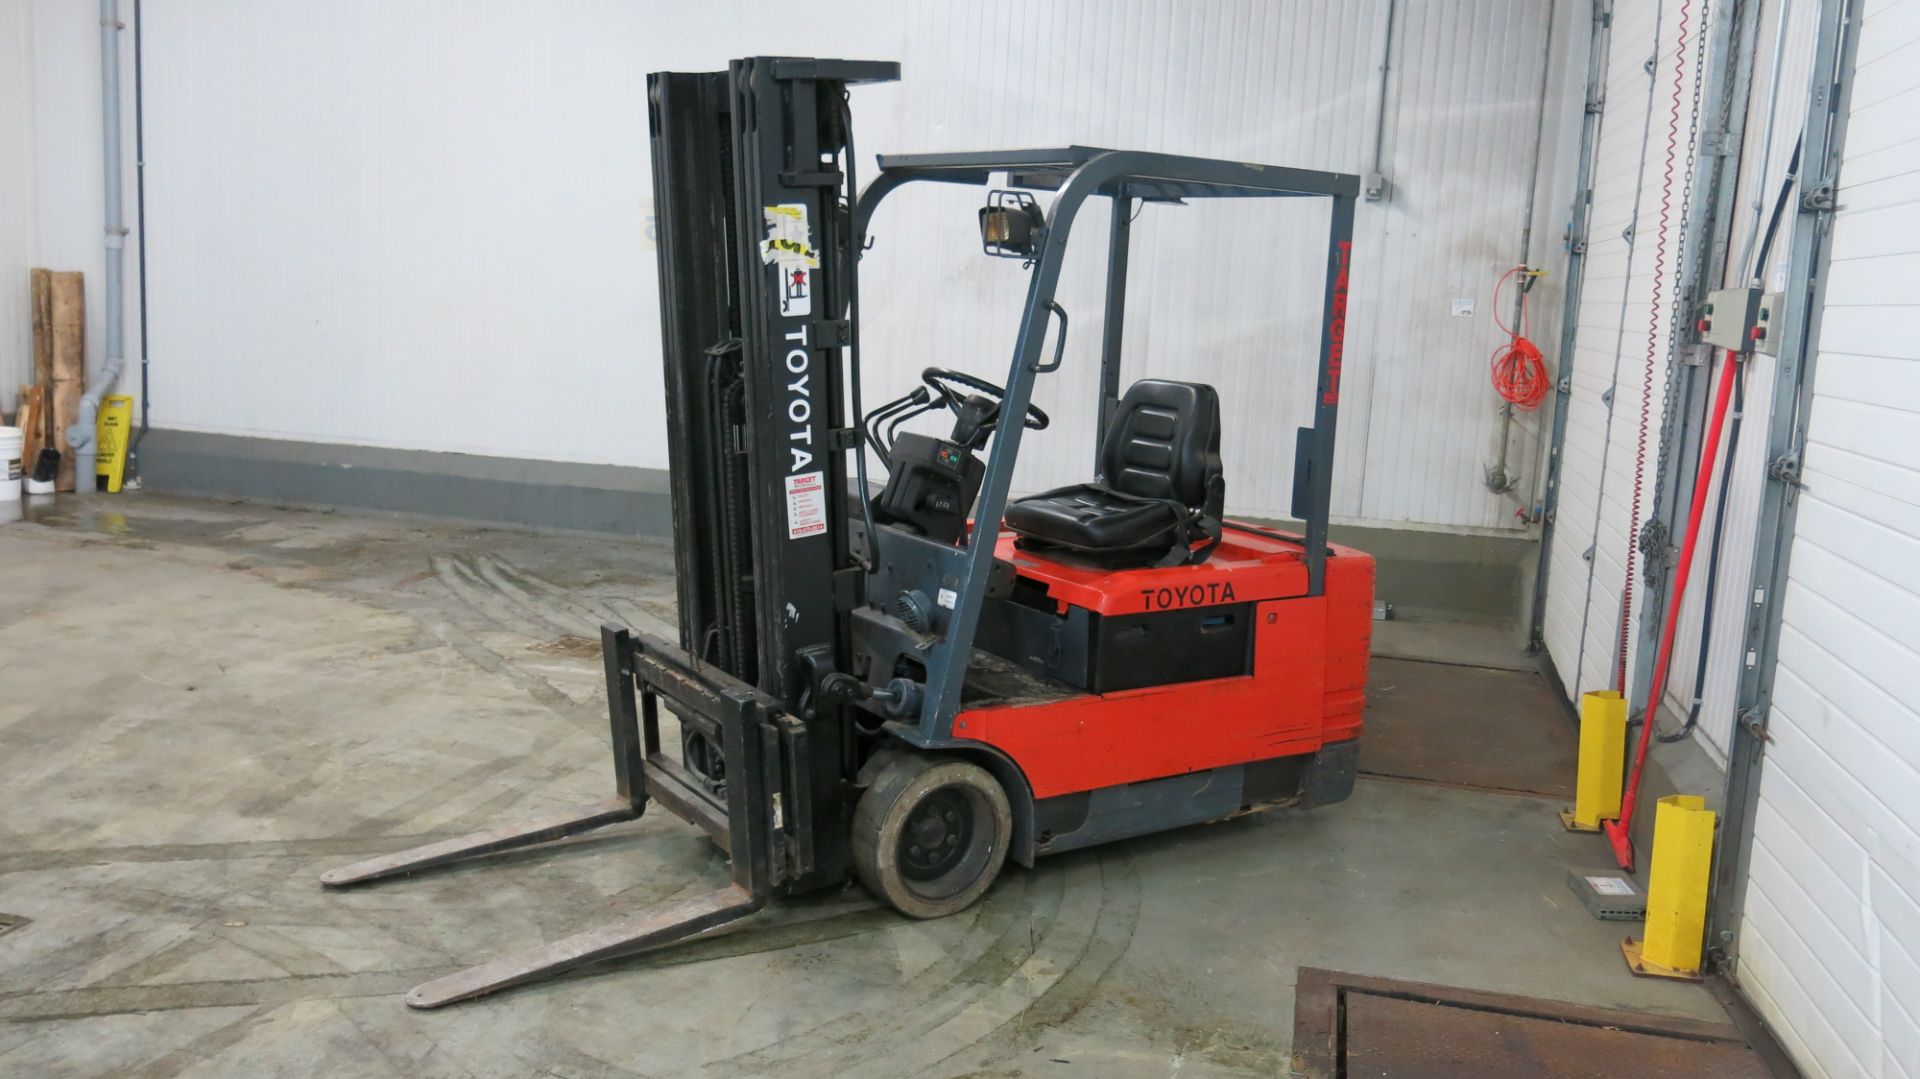 TOYOTA, 5FBE20, 3,450 LBS., 3-WHEEL, ELECTRIC FORKLIFT WITH SIDESHIFT, 189" MAXIMUM LIFT, - Image 2 of 6